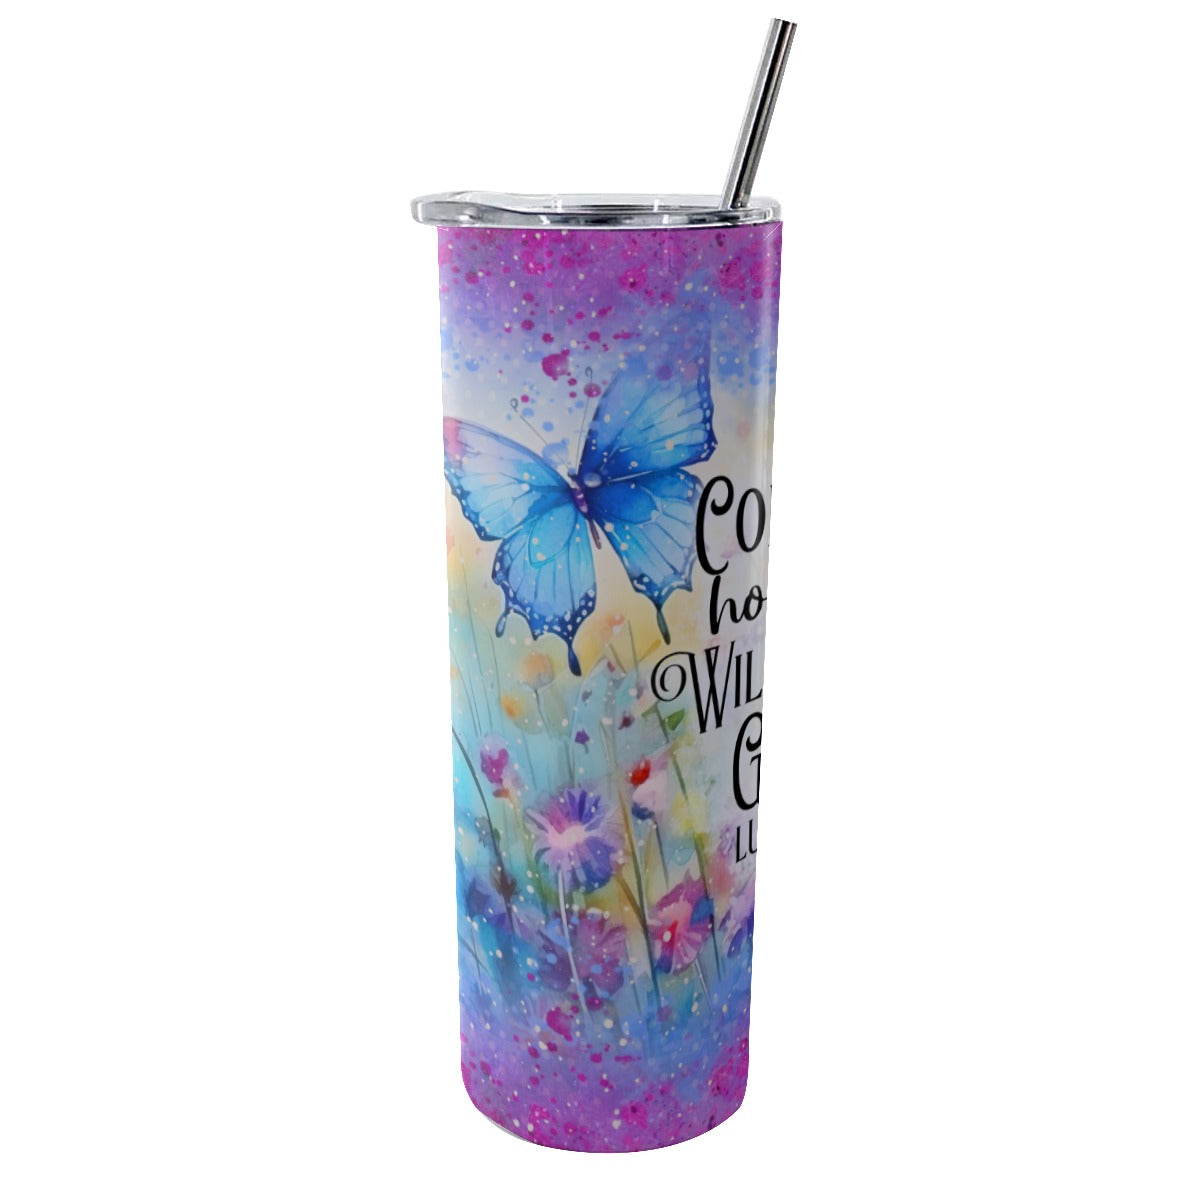 Consider How the Wildflower Grows Tumbler With Stainless Steel Straw 20oz